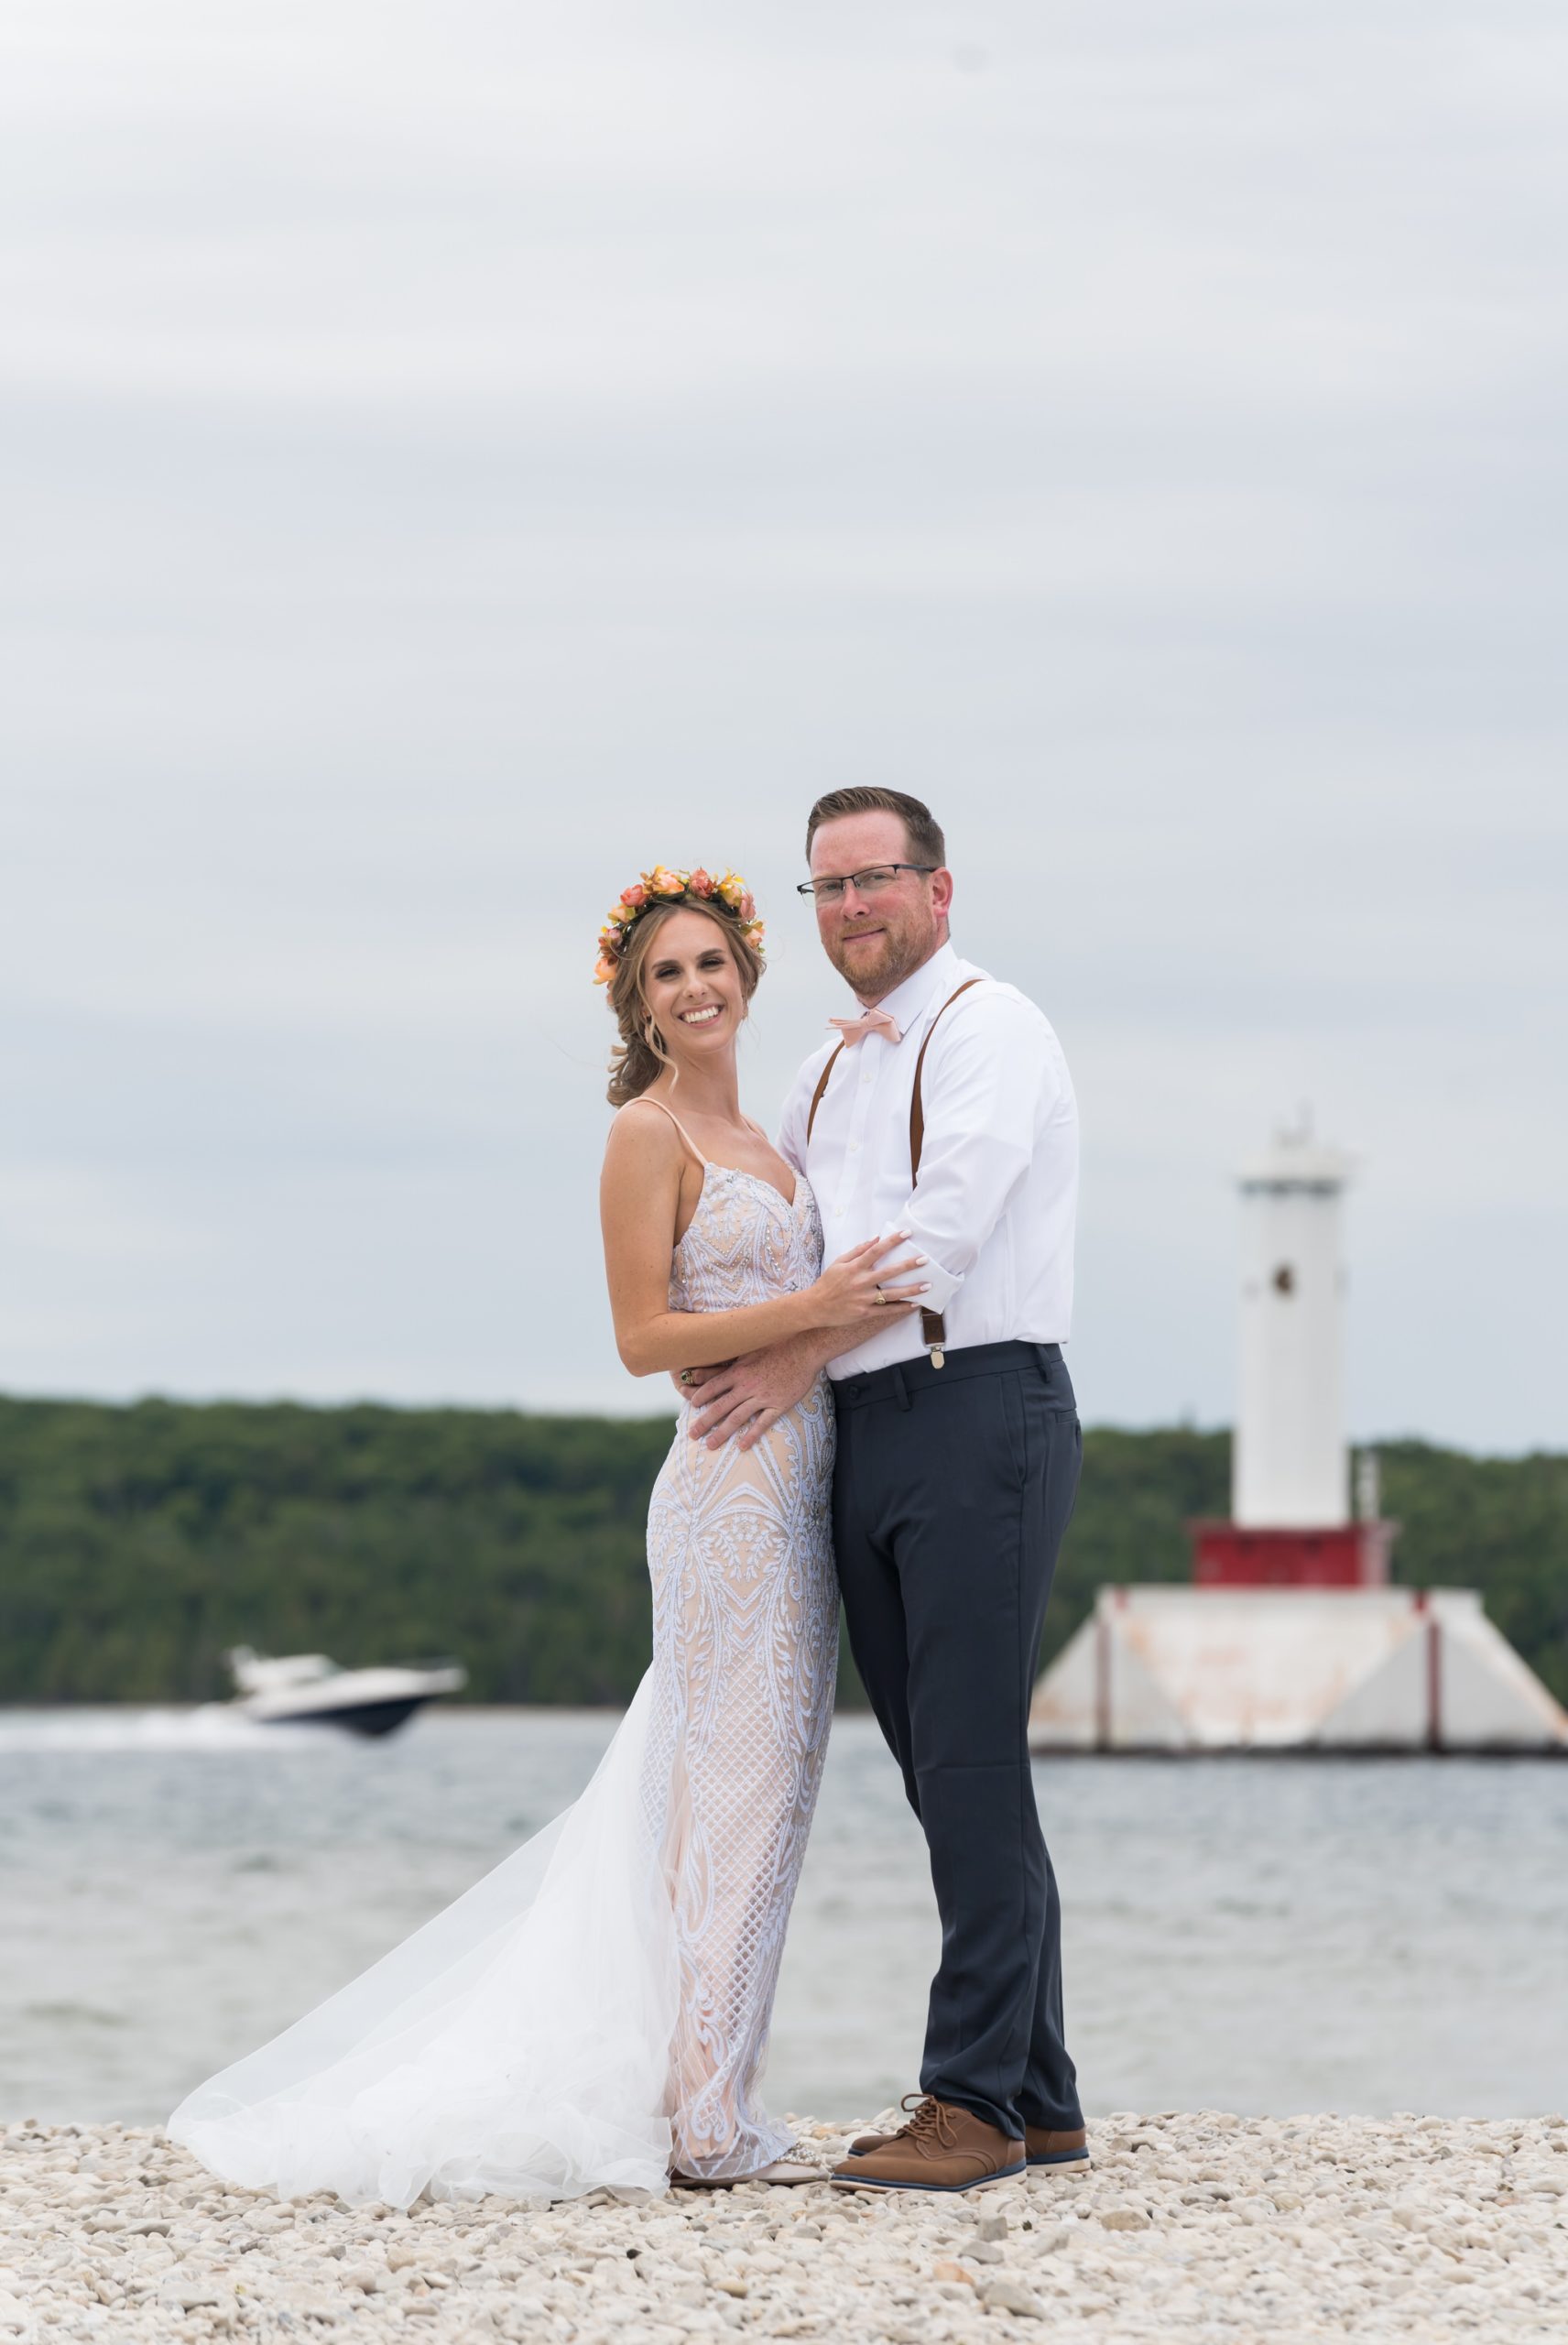 A bride and groom pose on the shores of Mackinac Island with a lighthouse in the background during their Mission Point Resort wedding.  